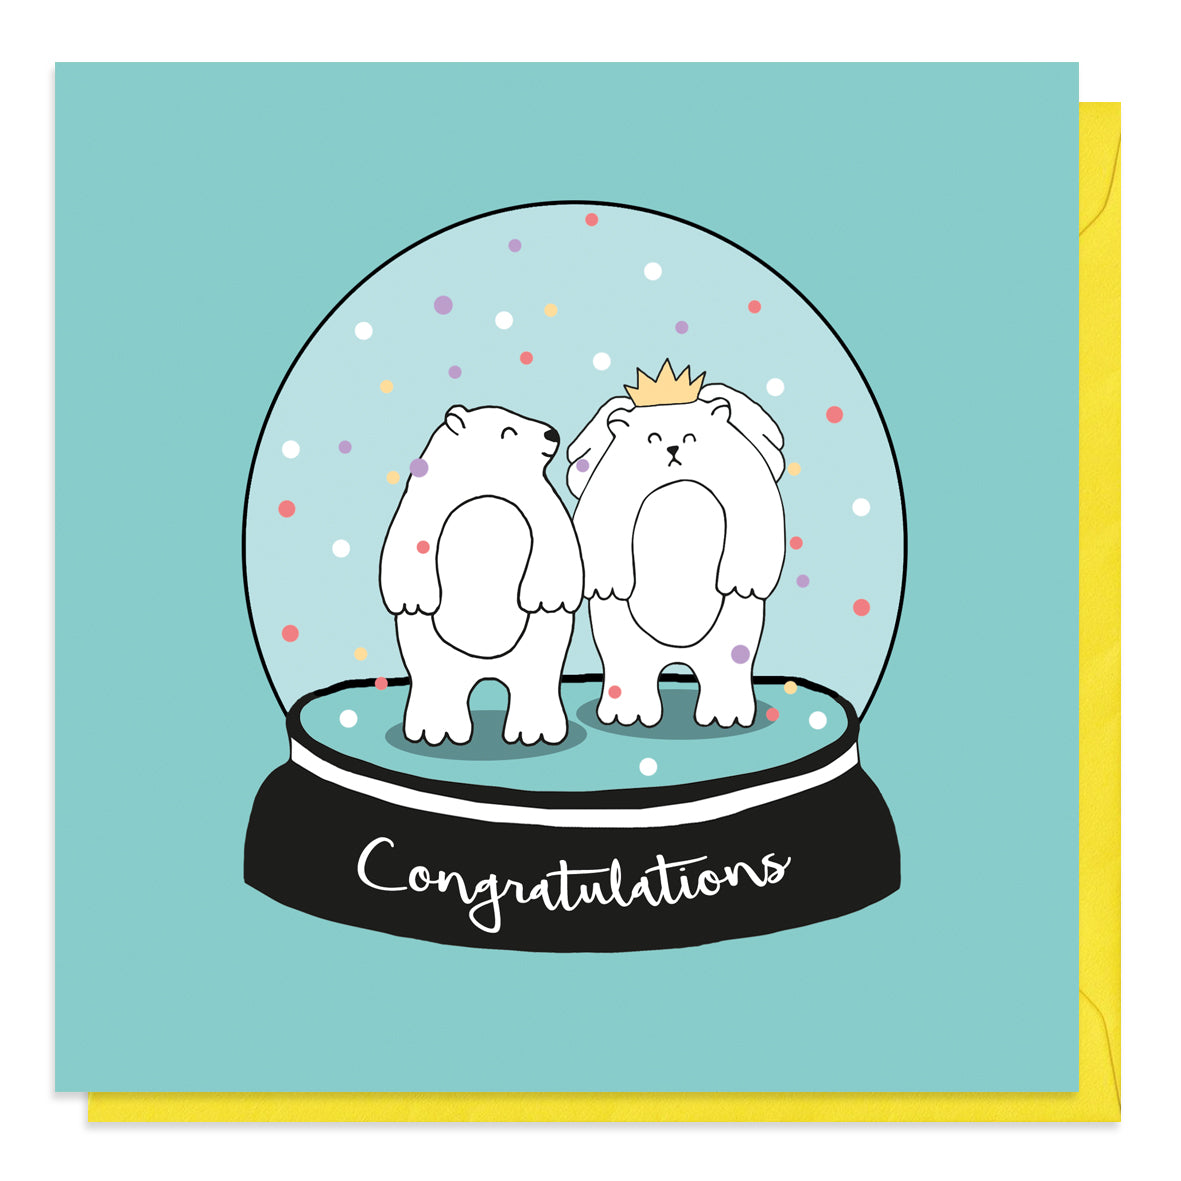 Turquoise card with an illustration of bears getting married in a snow globe